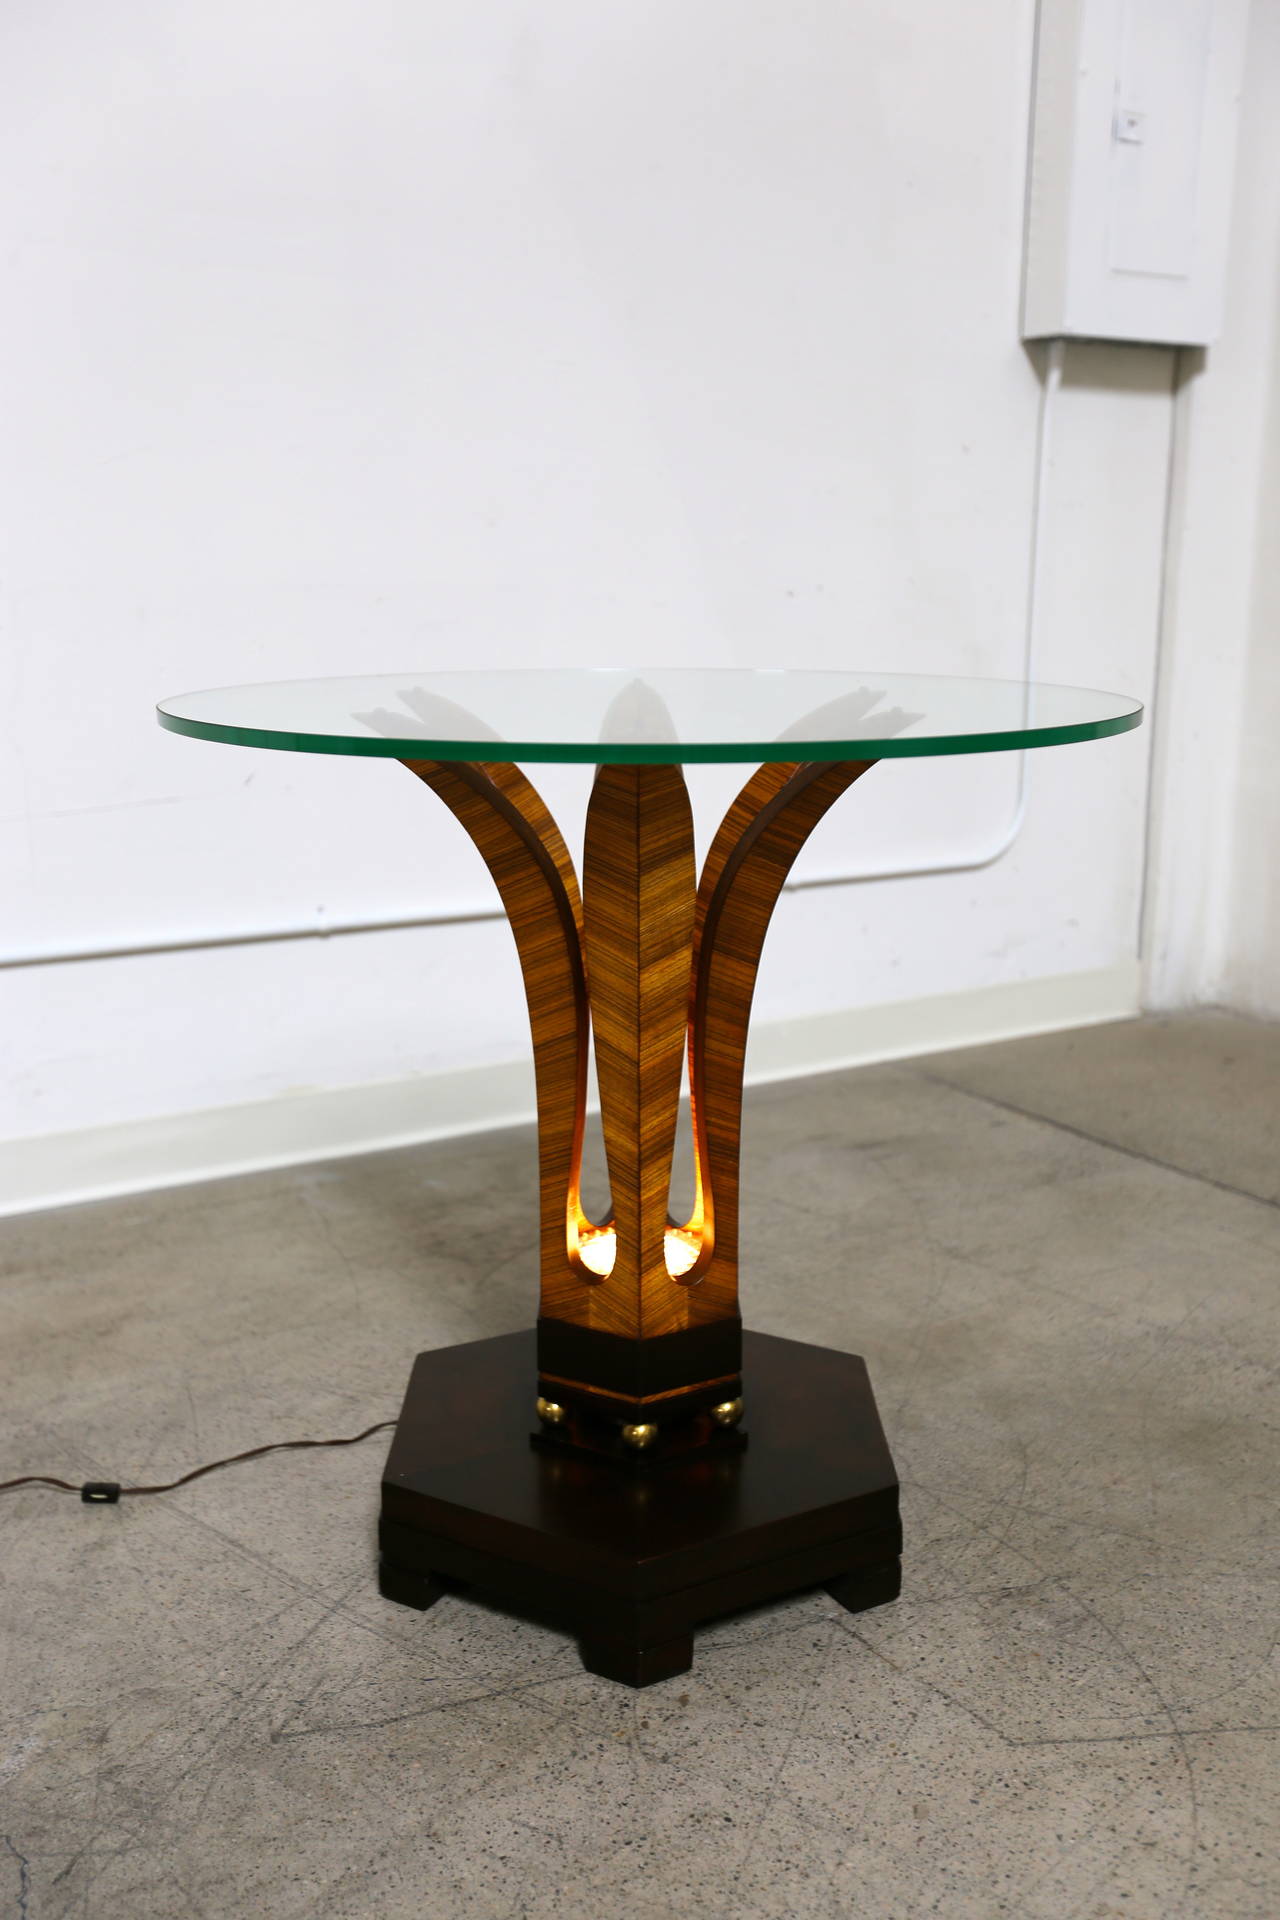 American Rare Illuminated Tawi Wood Side Table by Edward Wormley for Dunbar